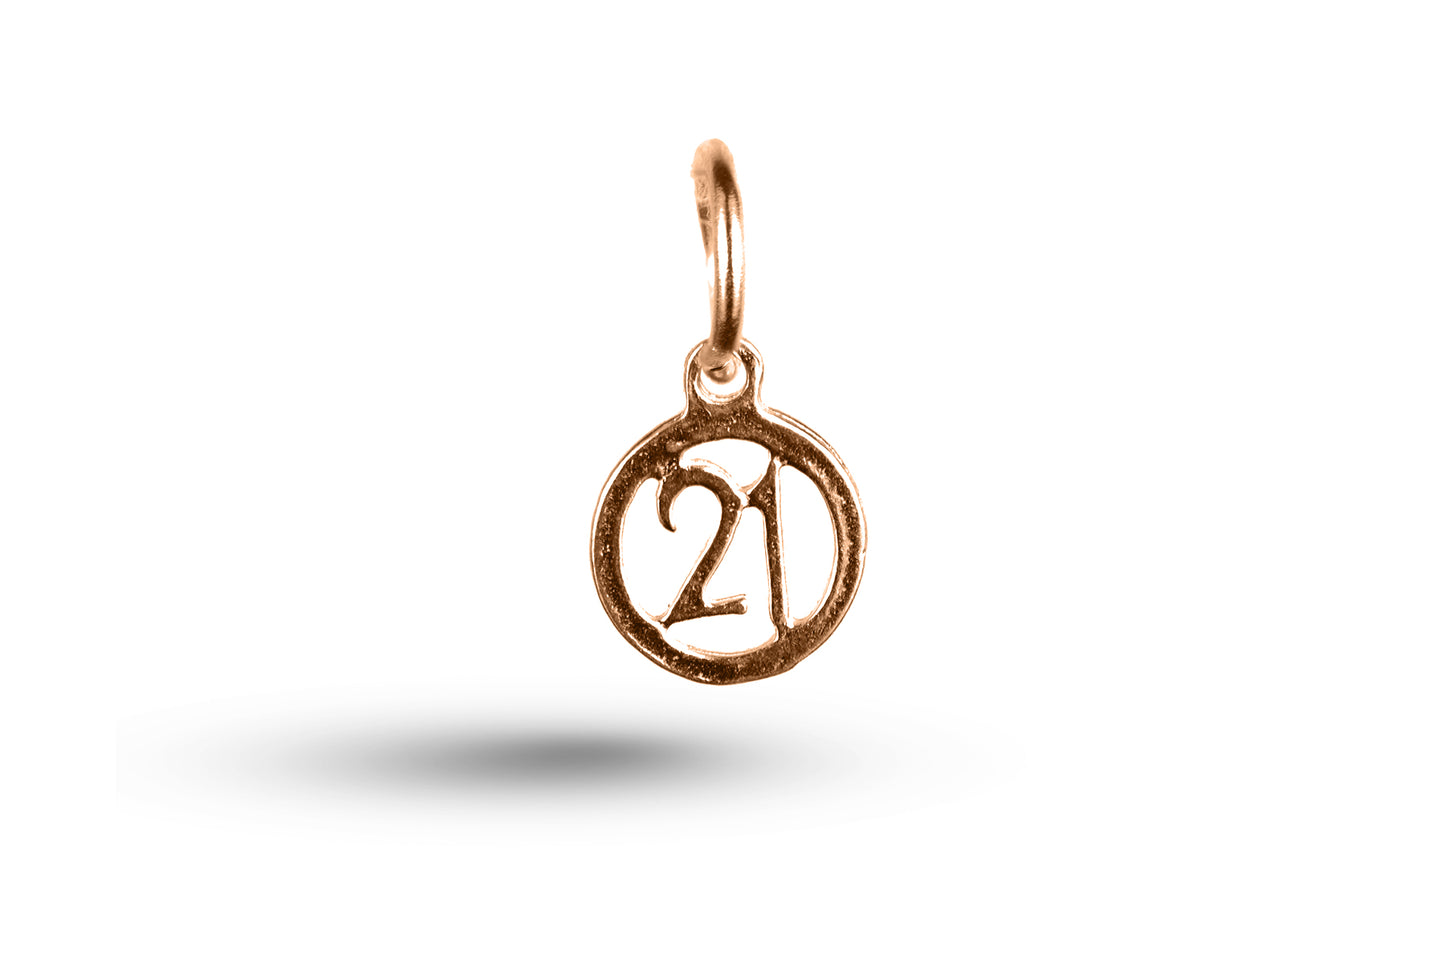 Rose gold Birthday 21 in Circle charm.